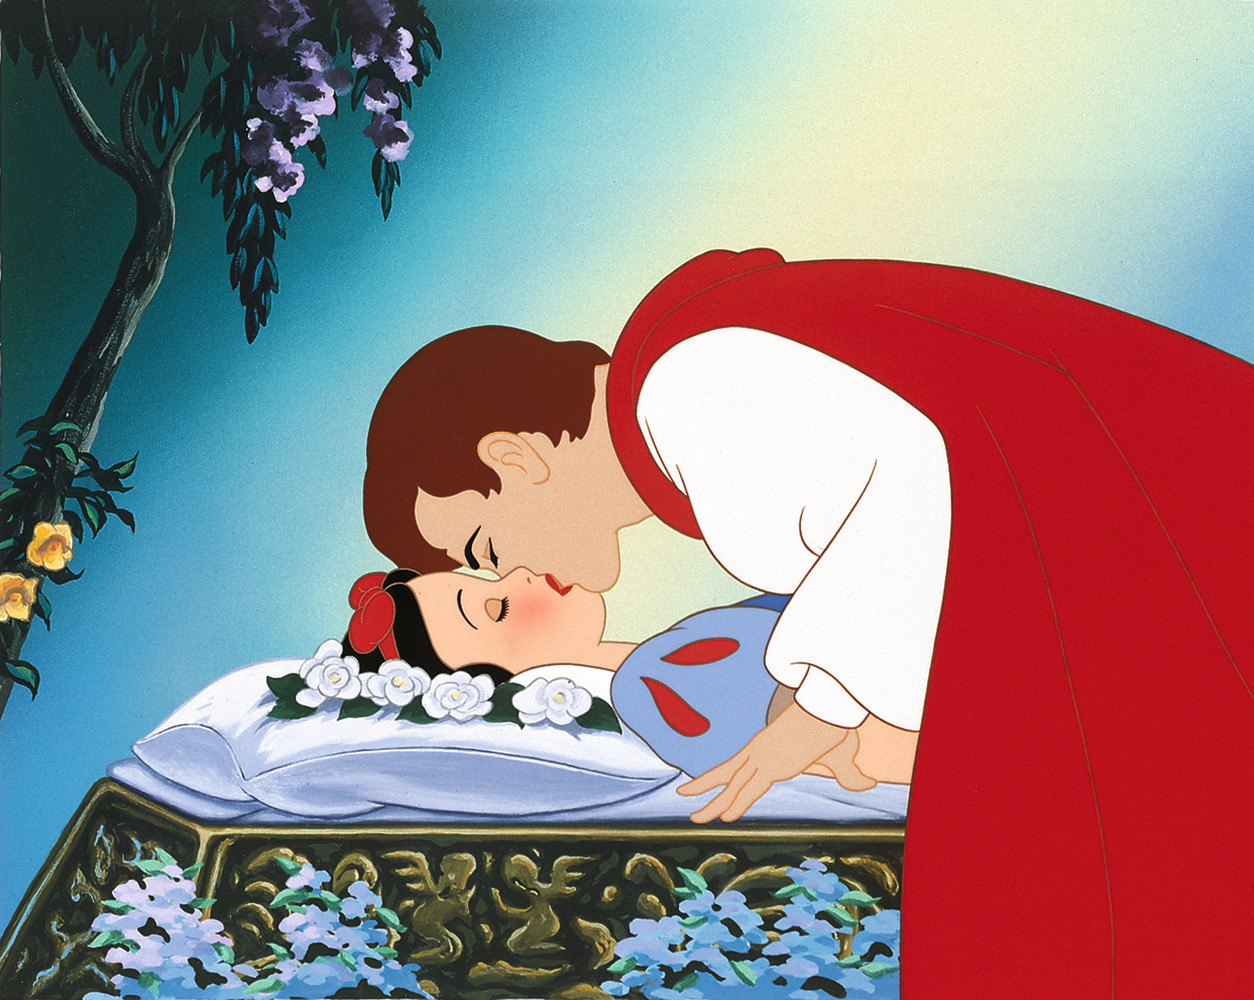 blanche-neige-et-les-sept-nains-snow-white-and-the-seven_006.jpg